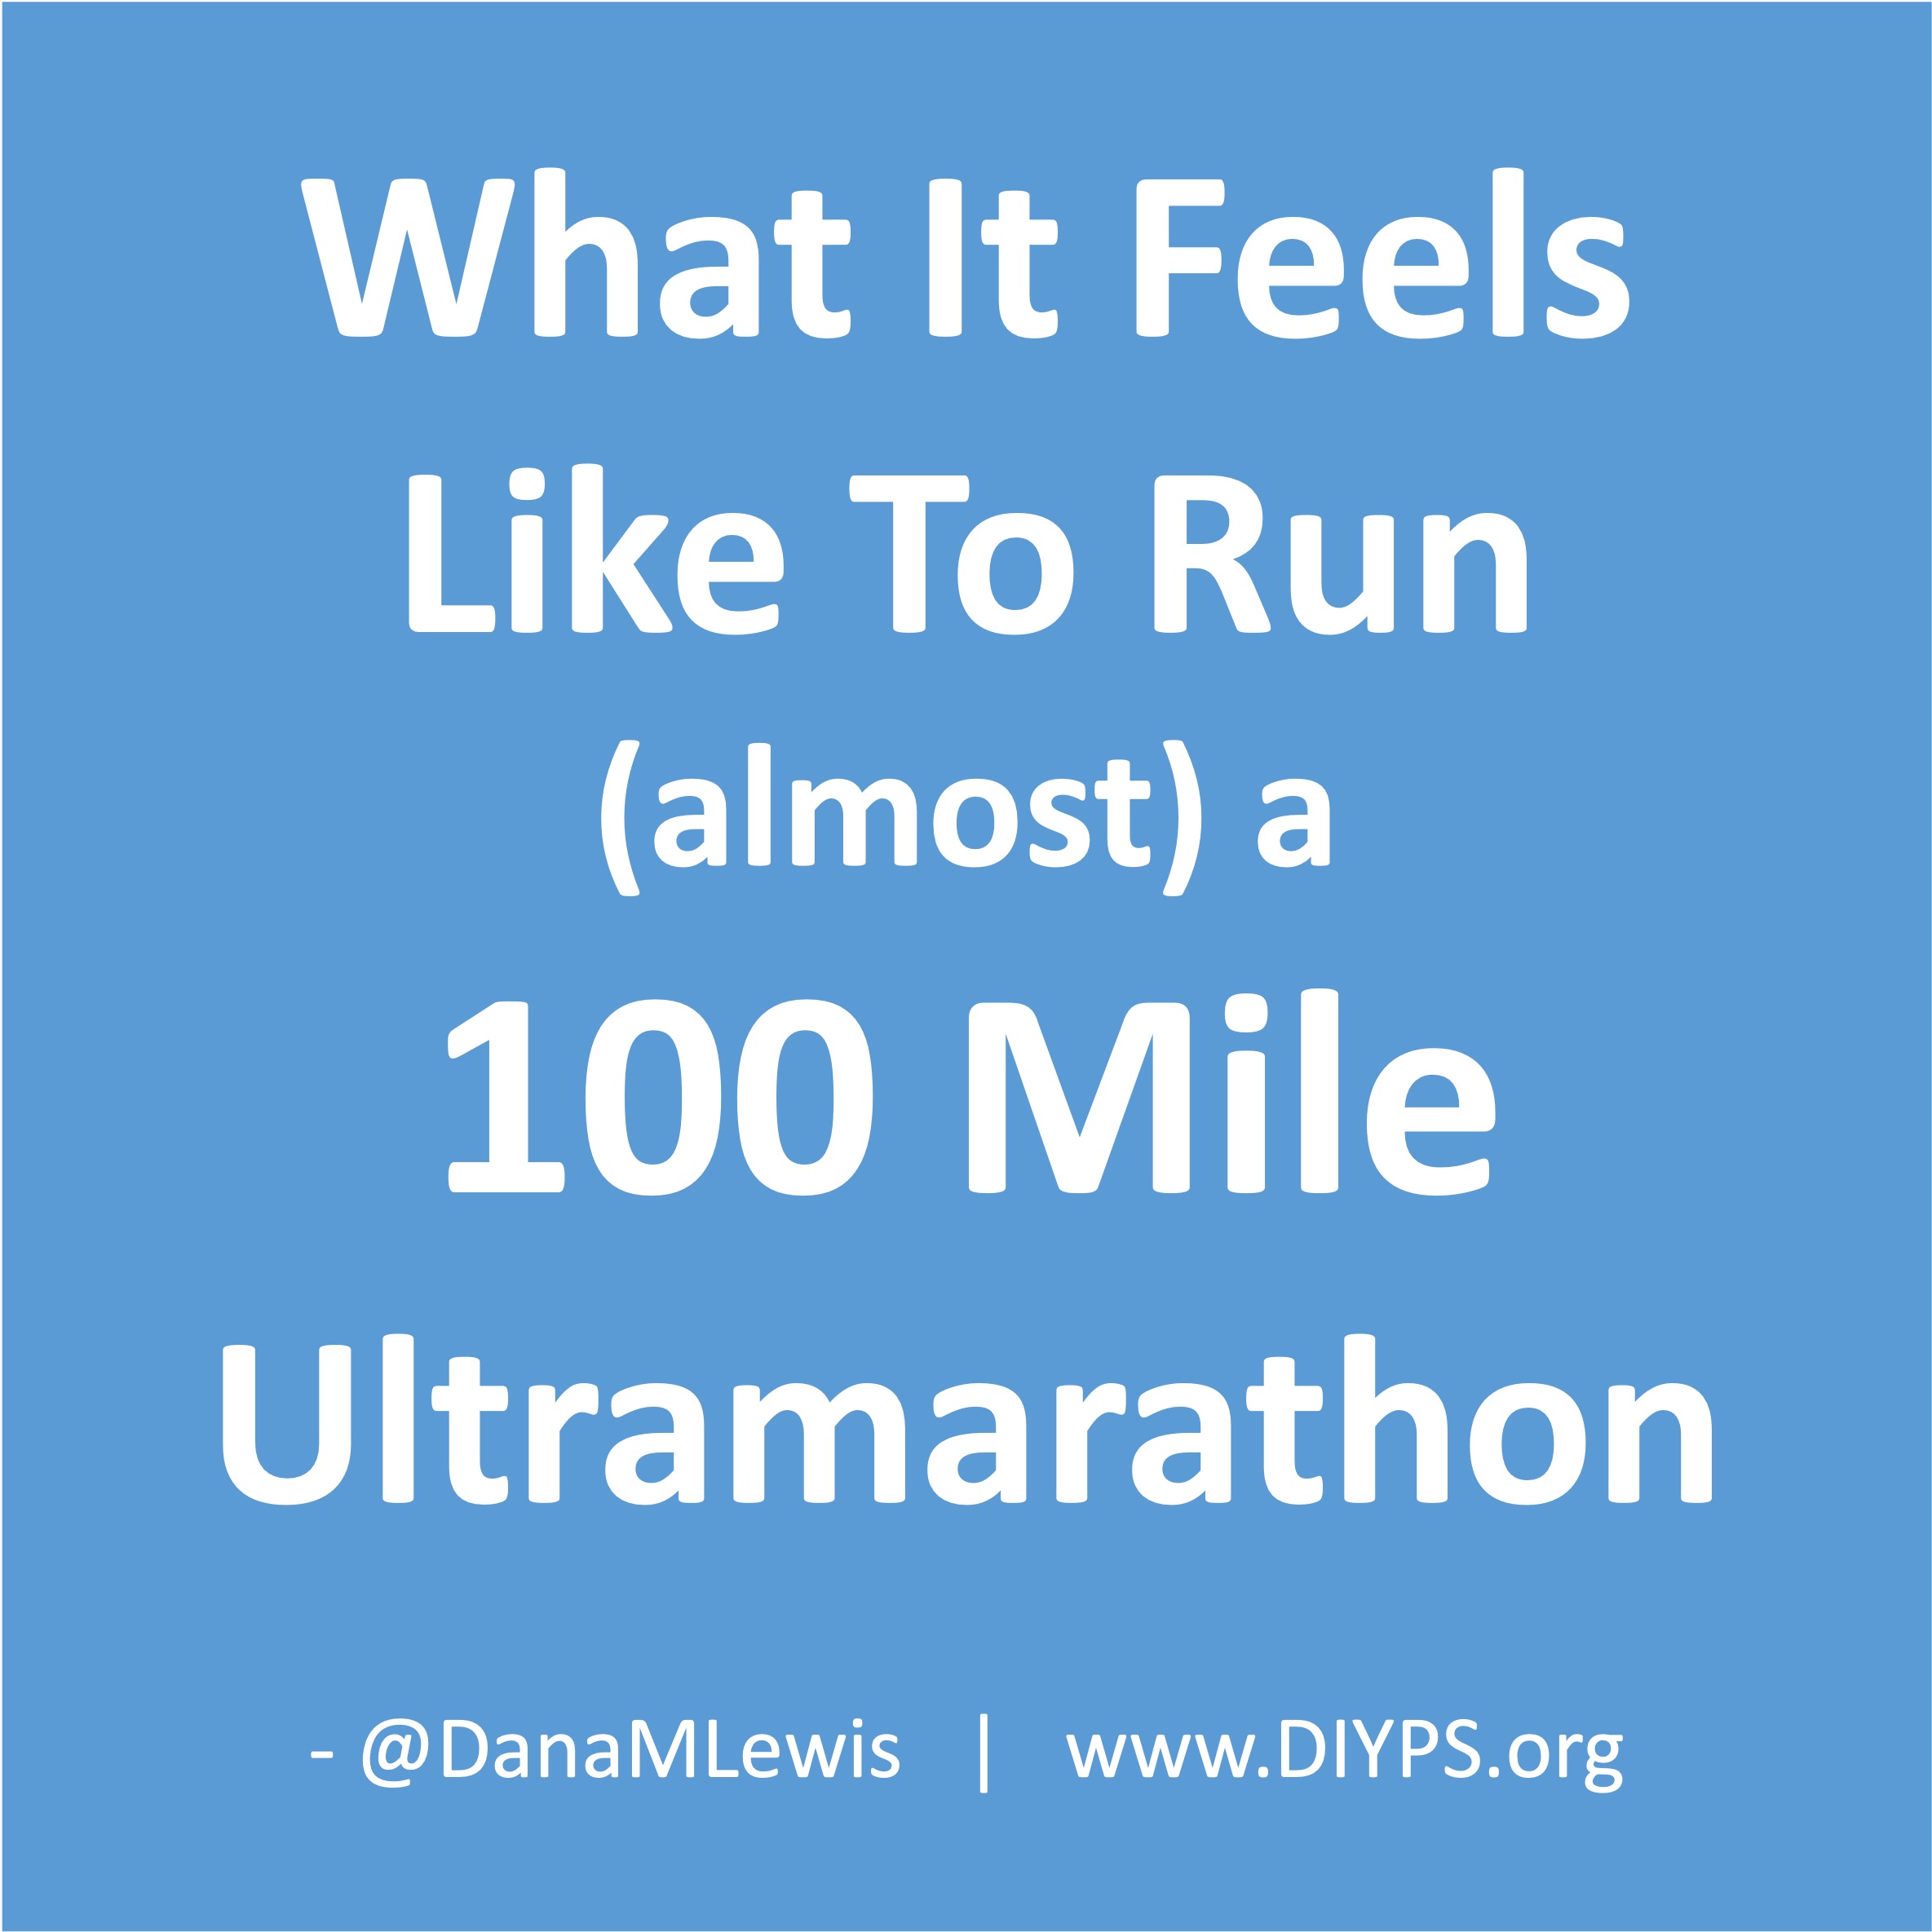 What it feels like to run (almost) a 100 mile ultramarathon, by Dana M. Lewis on DIYPS.org